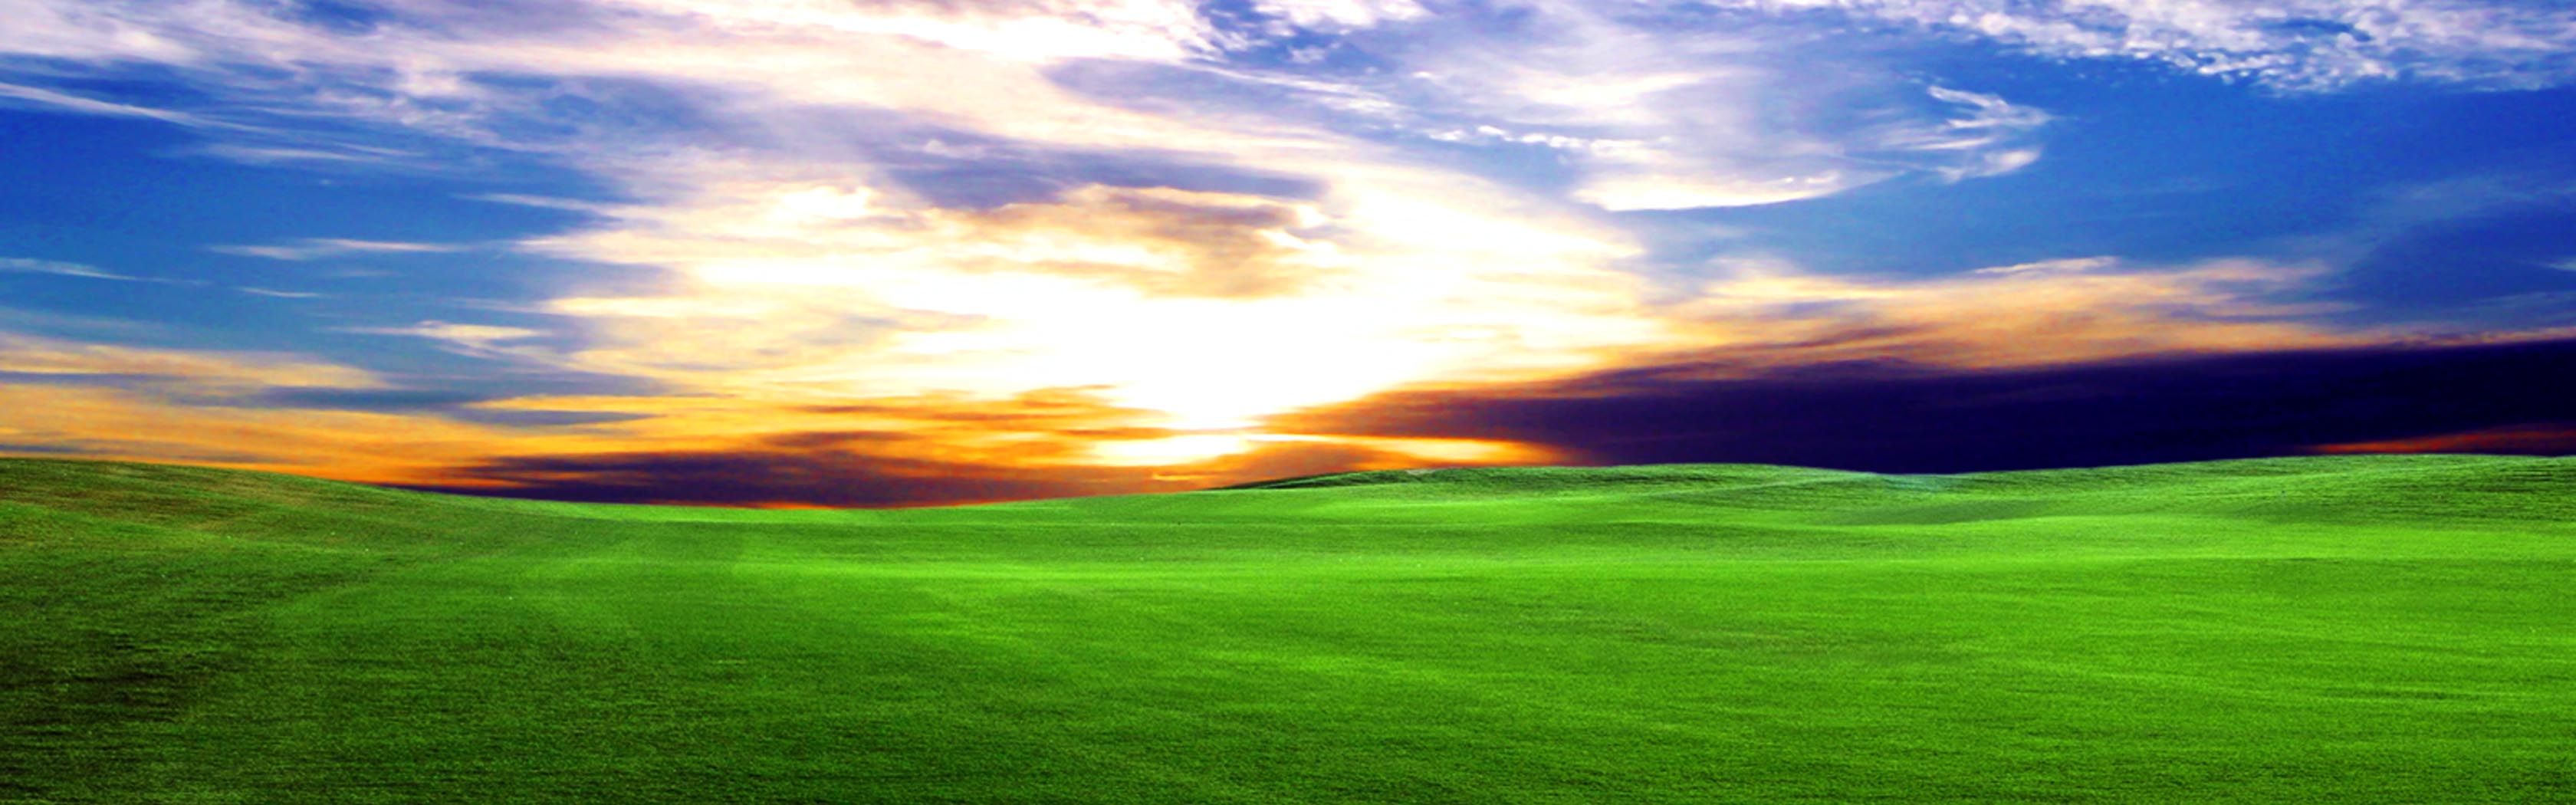 Vibrant sunrise over a field of green grass